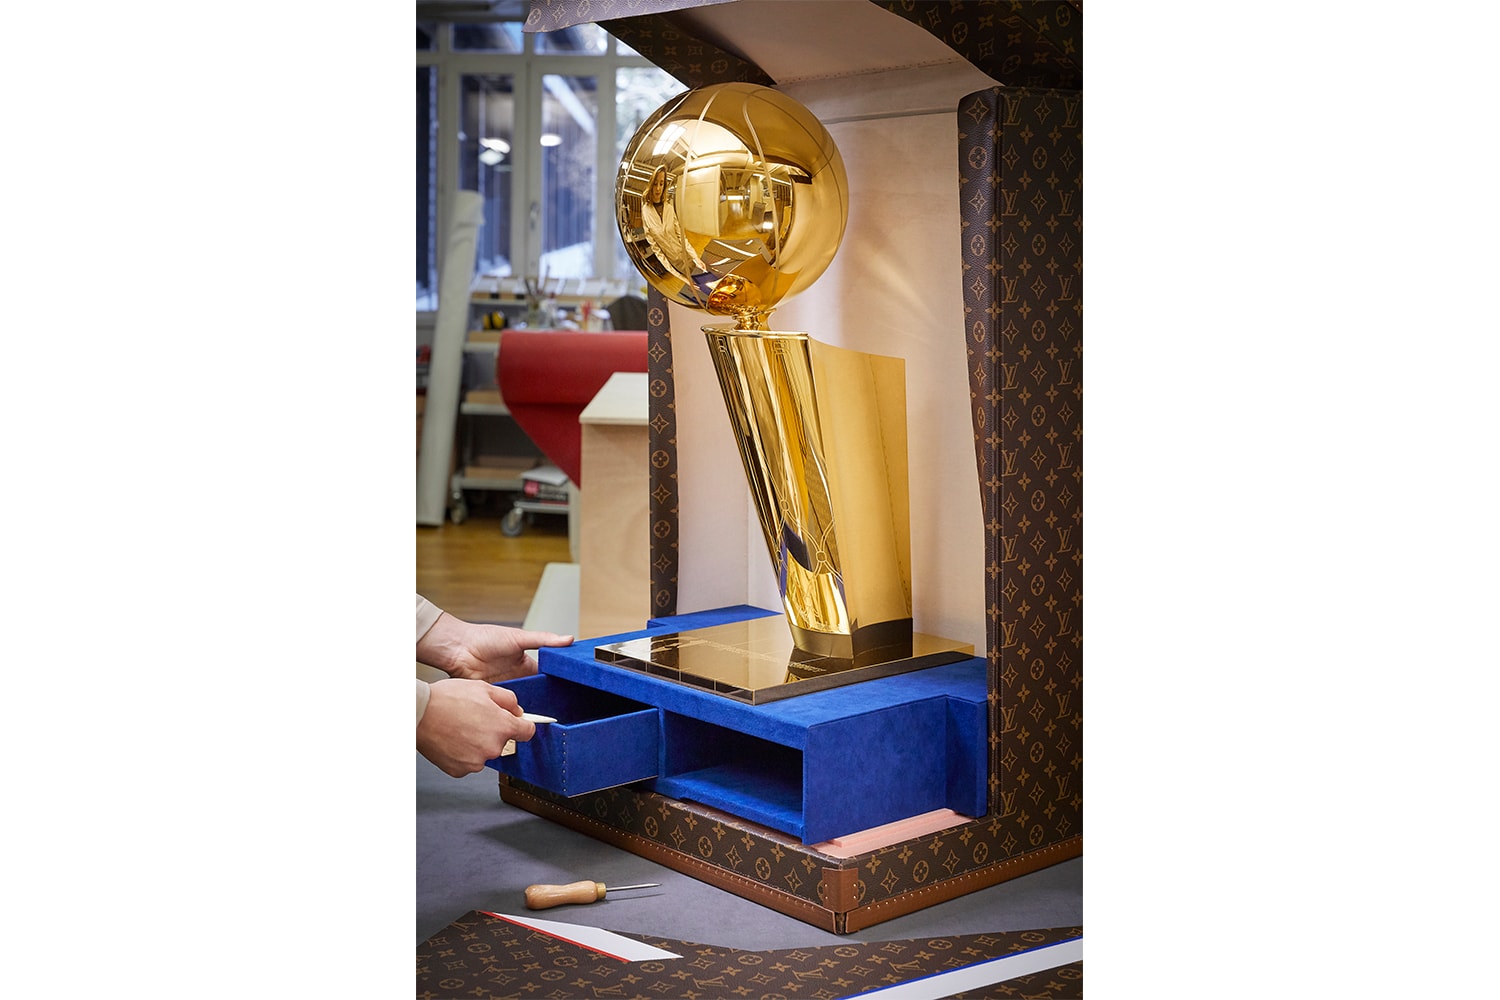 NBA - The #LouisVuitton Trophy Travel Case delivered the